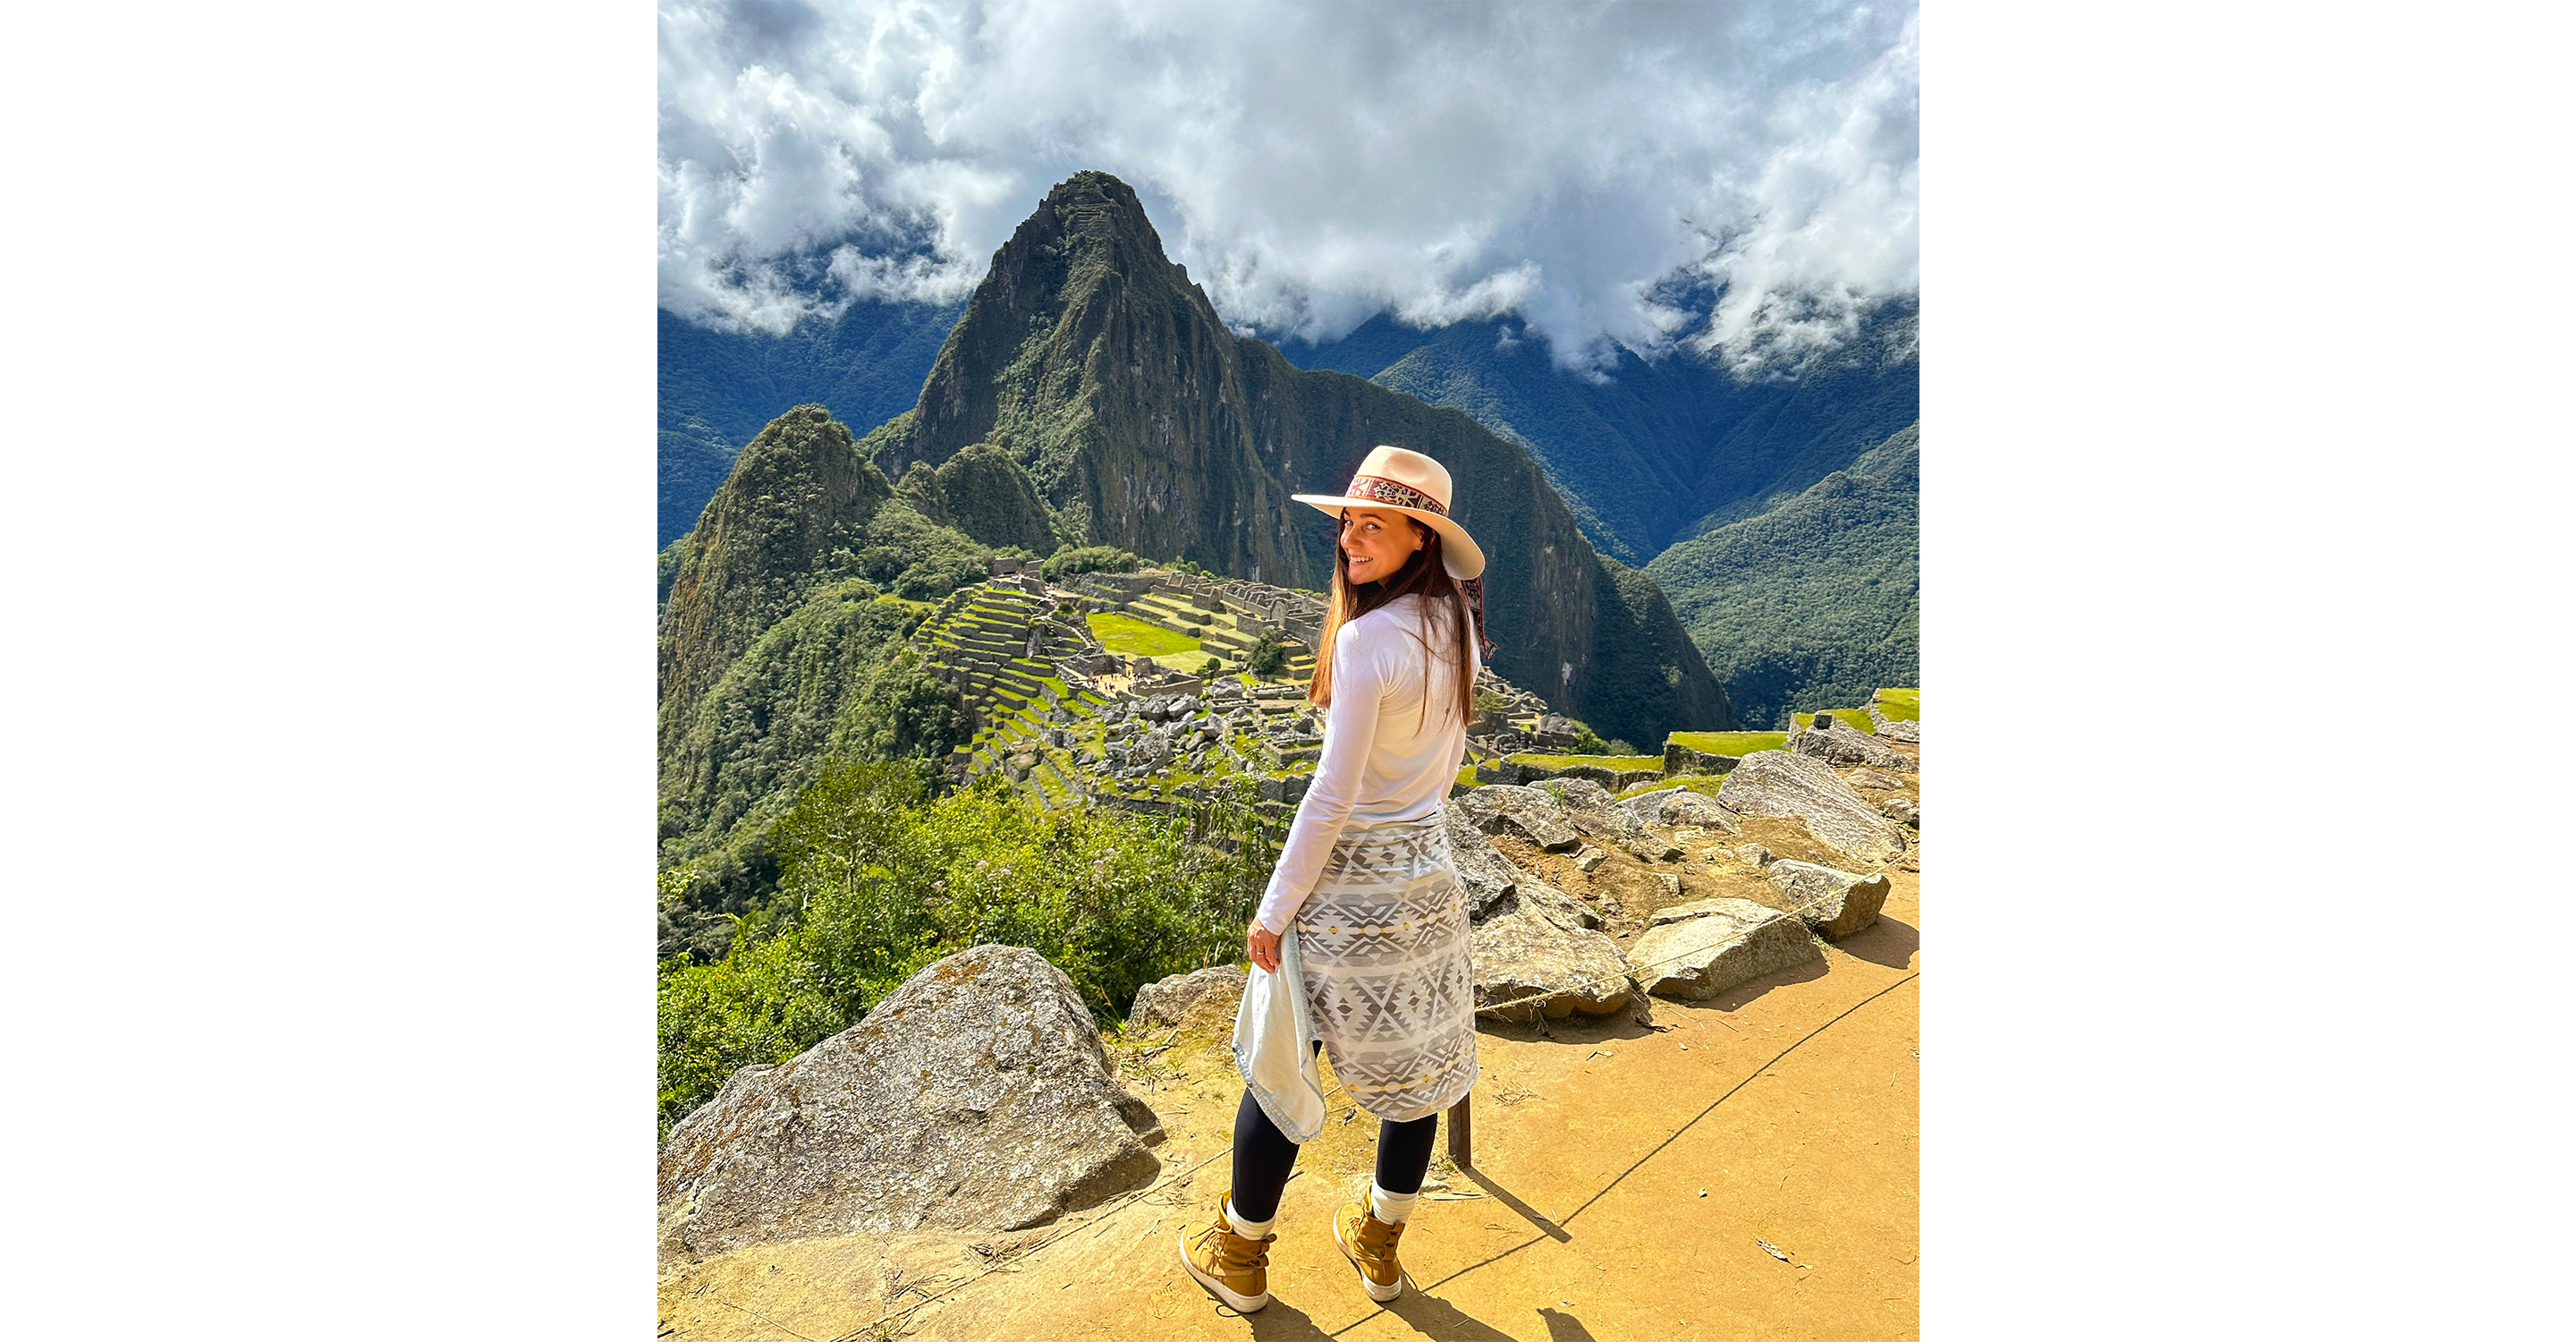 Taking in the beauty of Machu Picchu